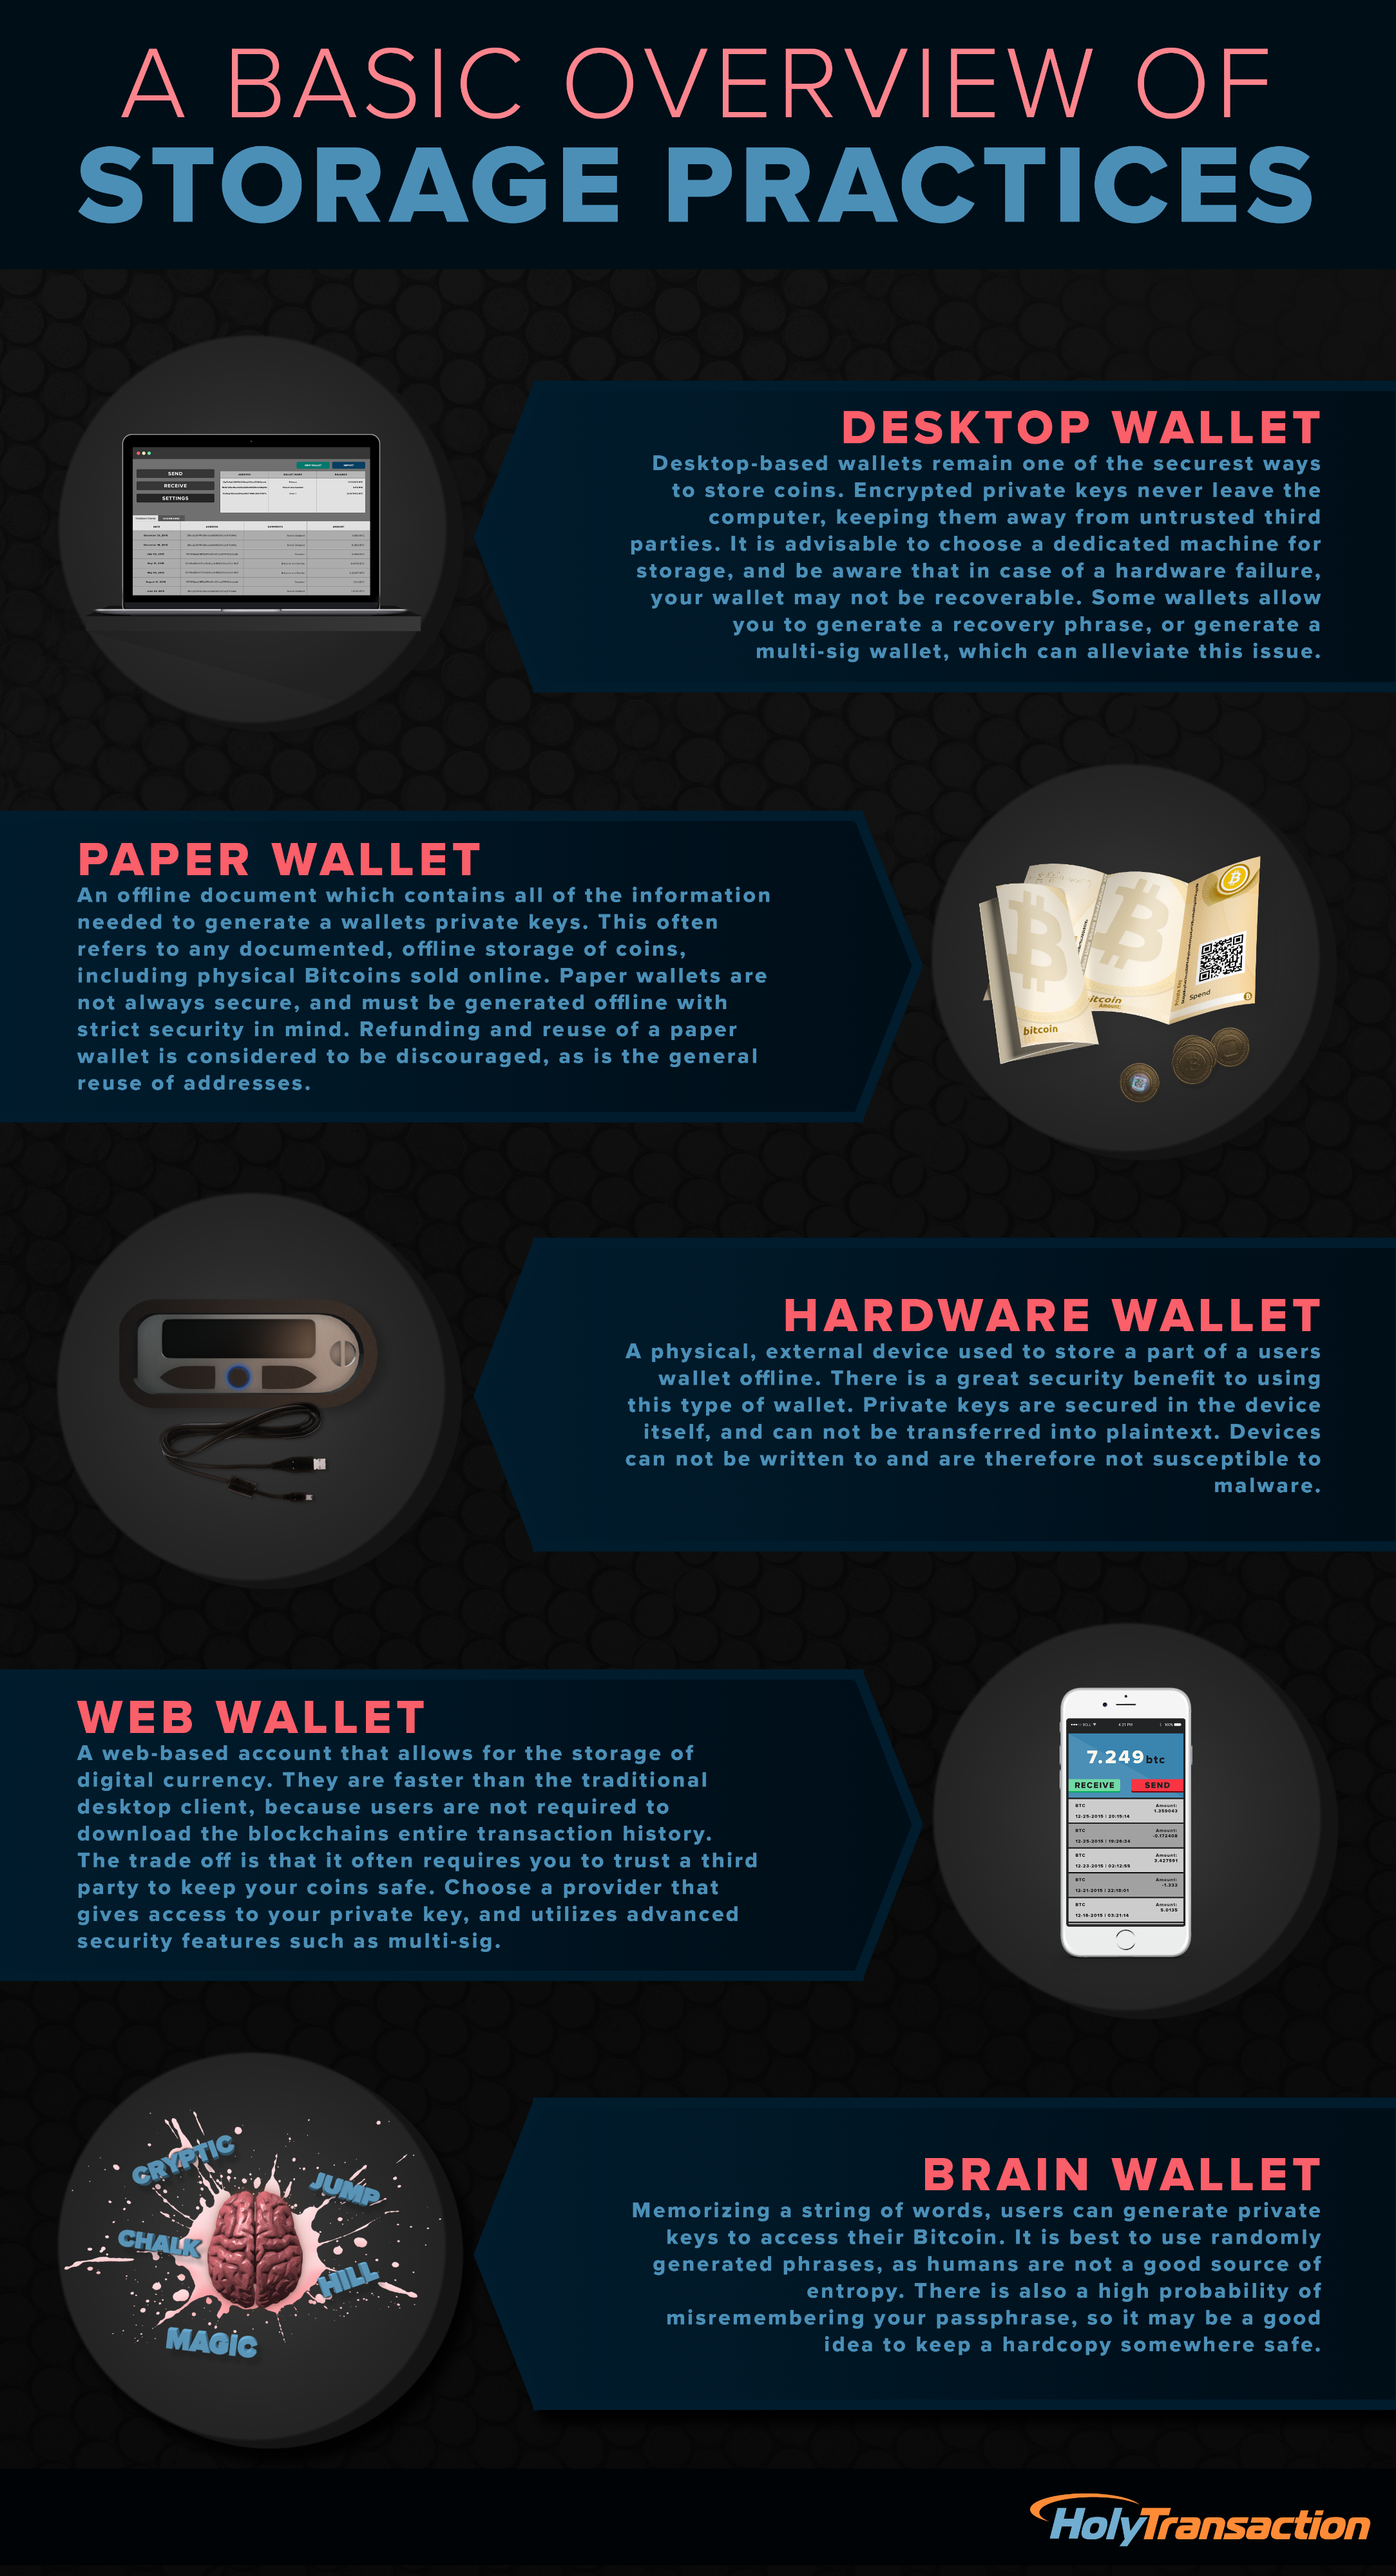 A Basic Overview of Storage Practices - Infographic